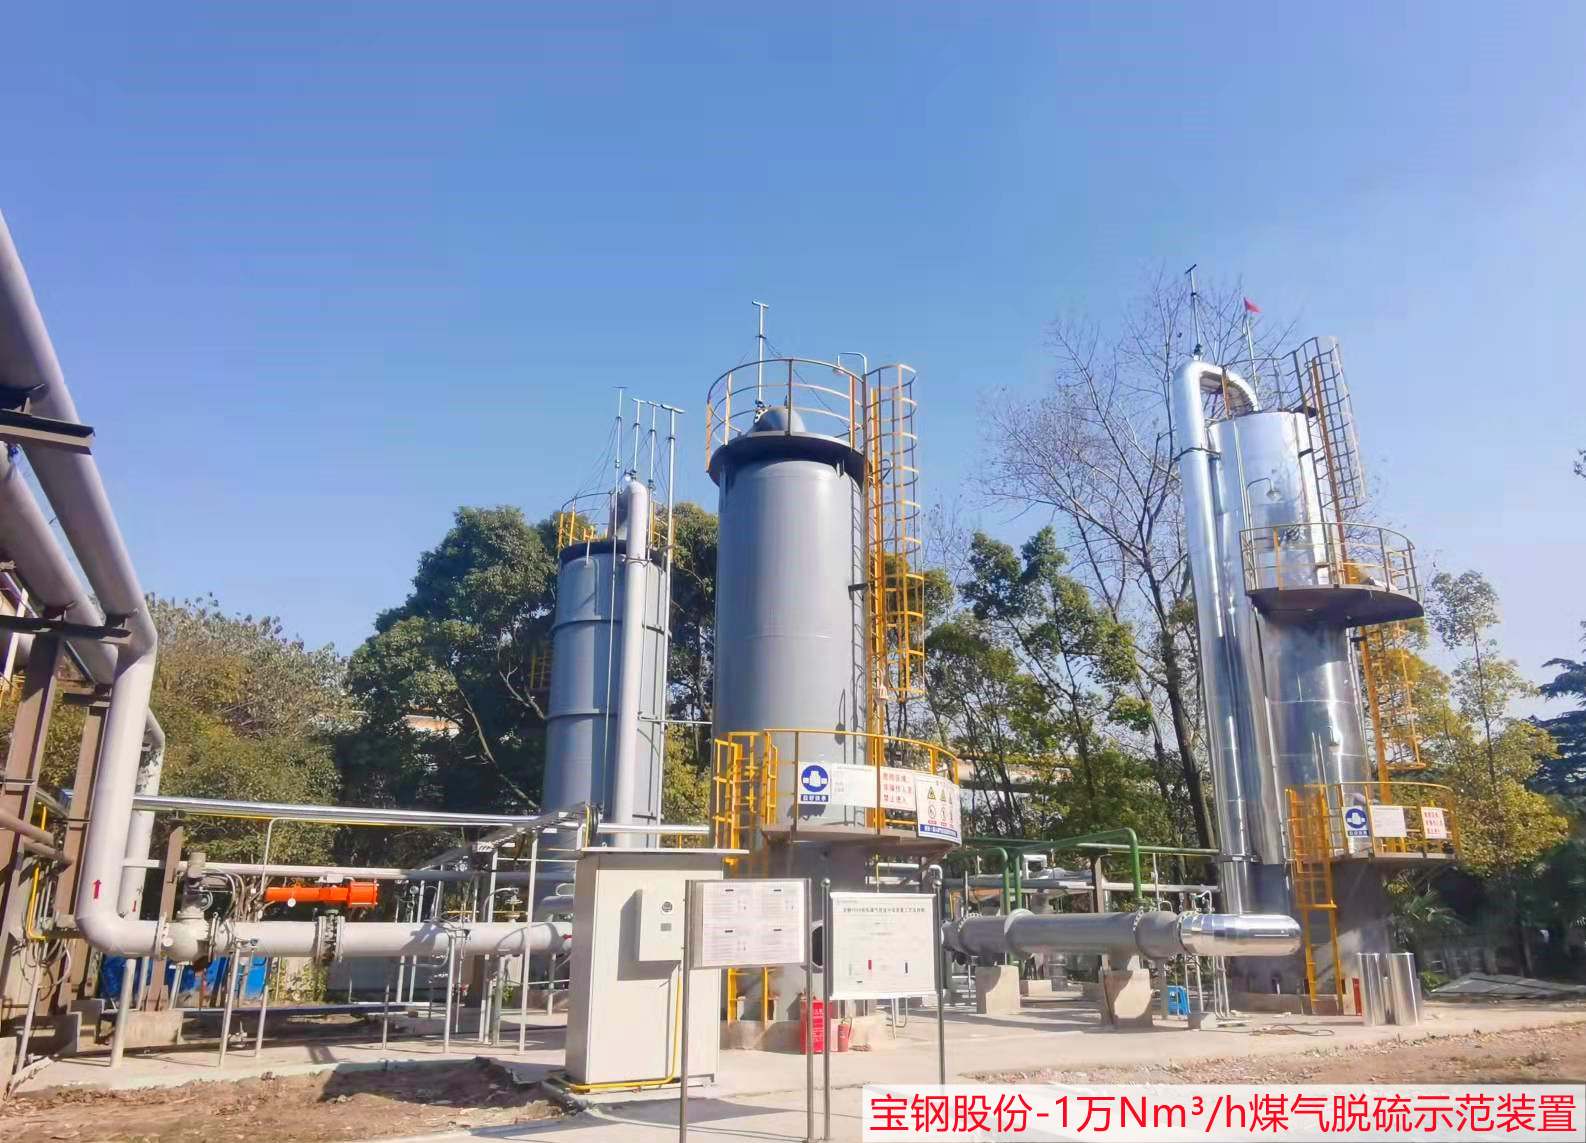 Baosteel Iron and Steel Co., Ltd. 10,000 cubic meters of gas desulfurization process technology demonstration pilot plant